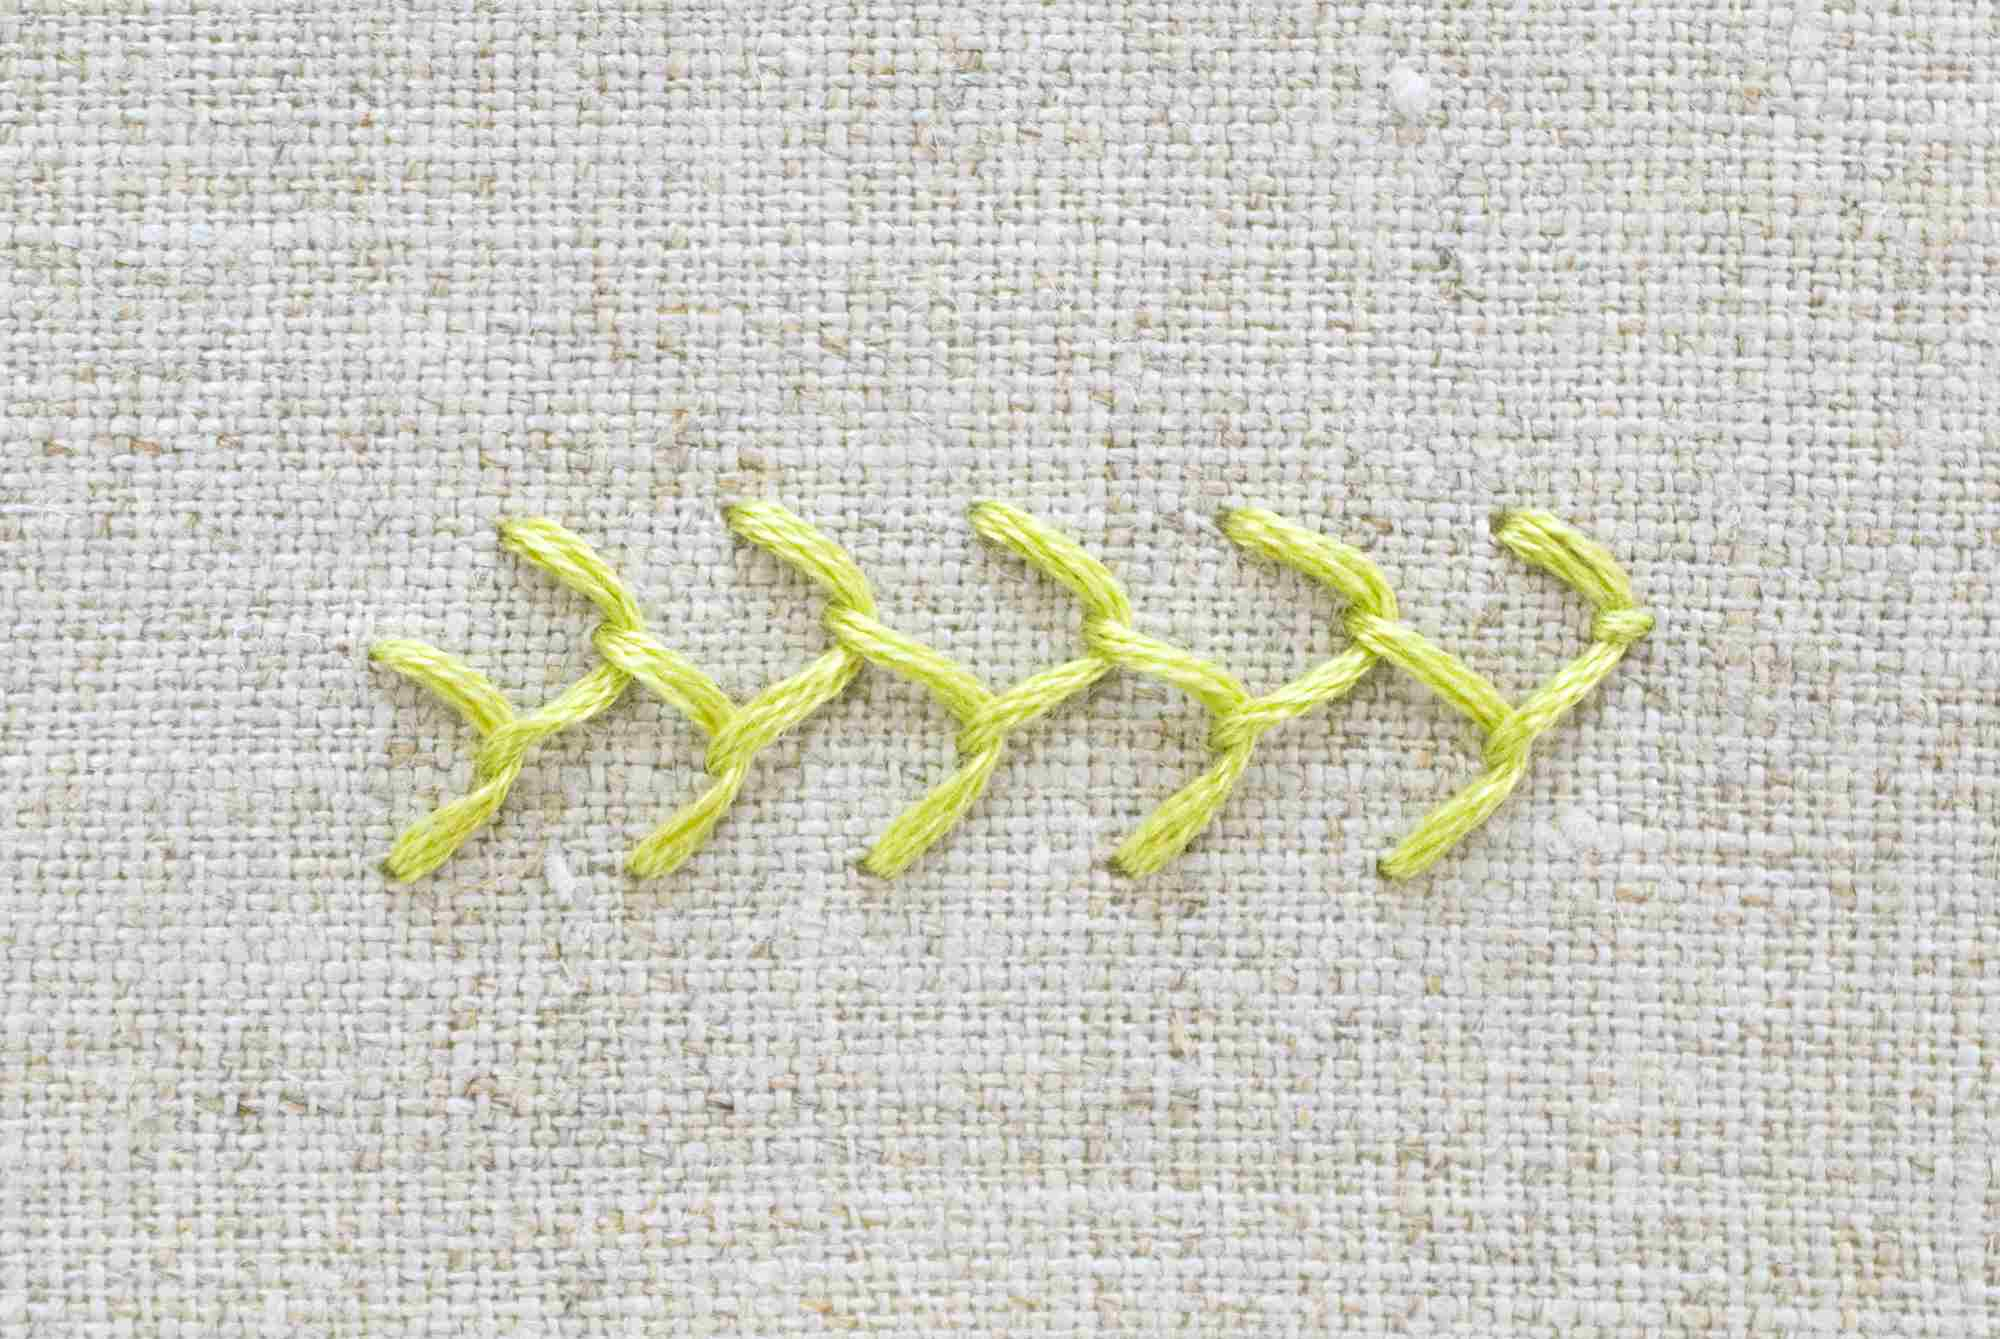 Fun Embroidery Patterns 15 Stitches Every Embroiderer Should Know